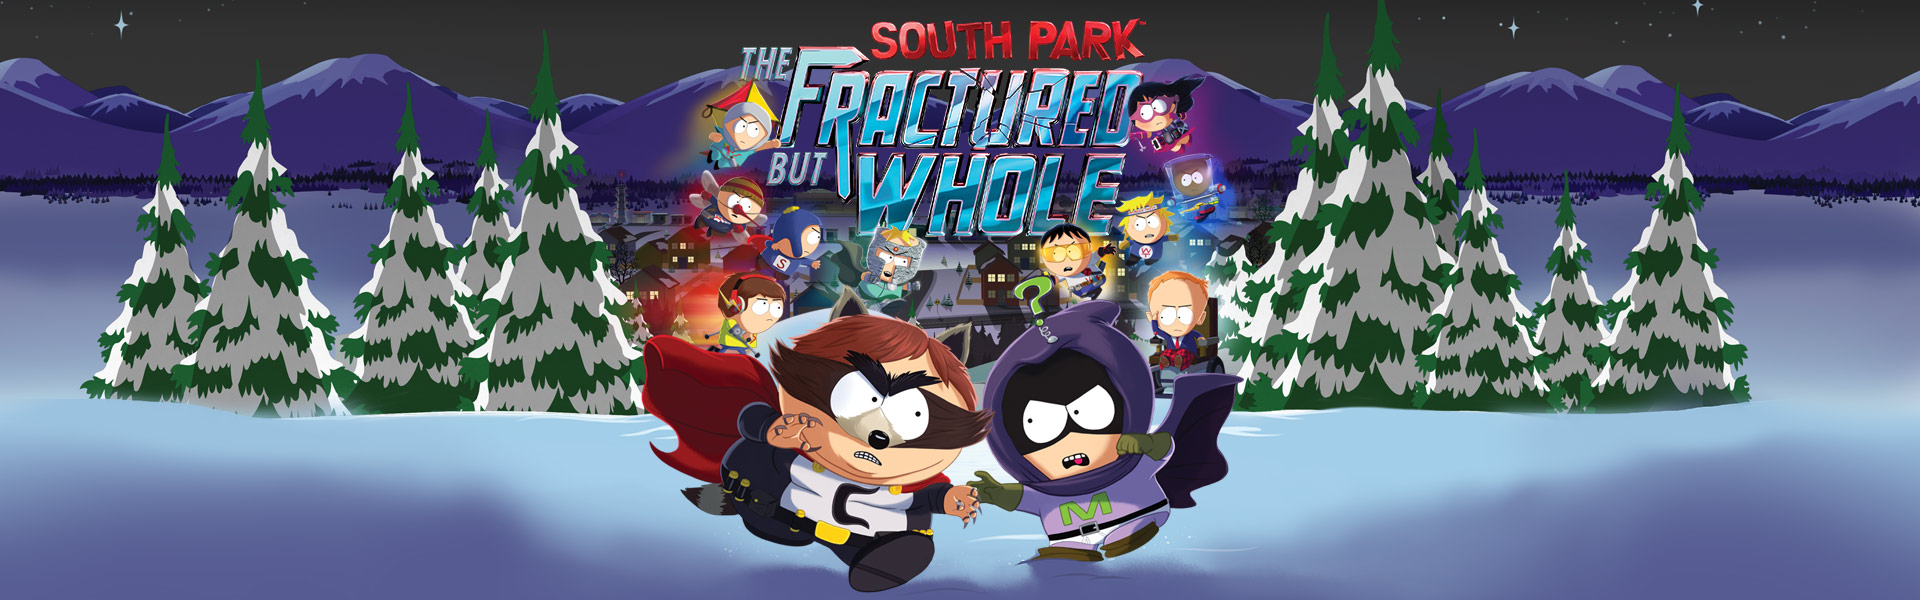 south park the fractured but whole cis gender bullshit